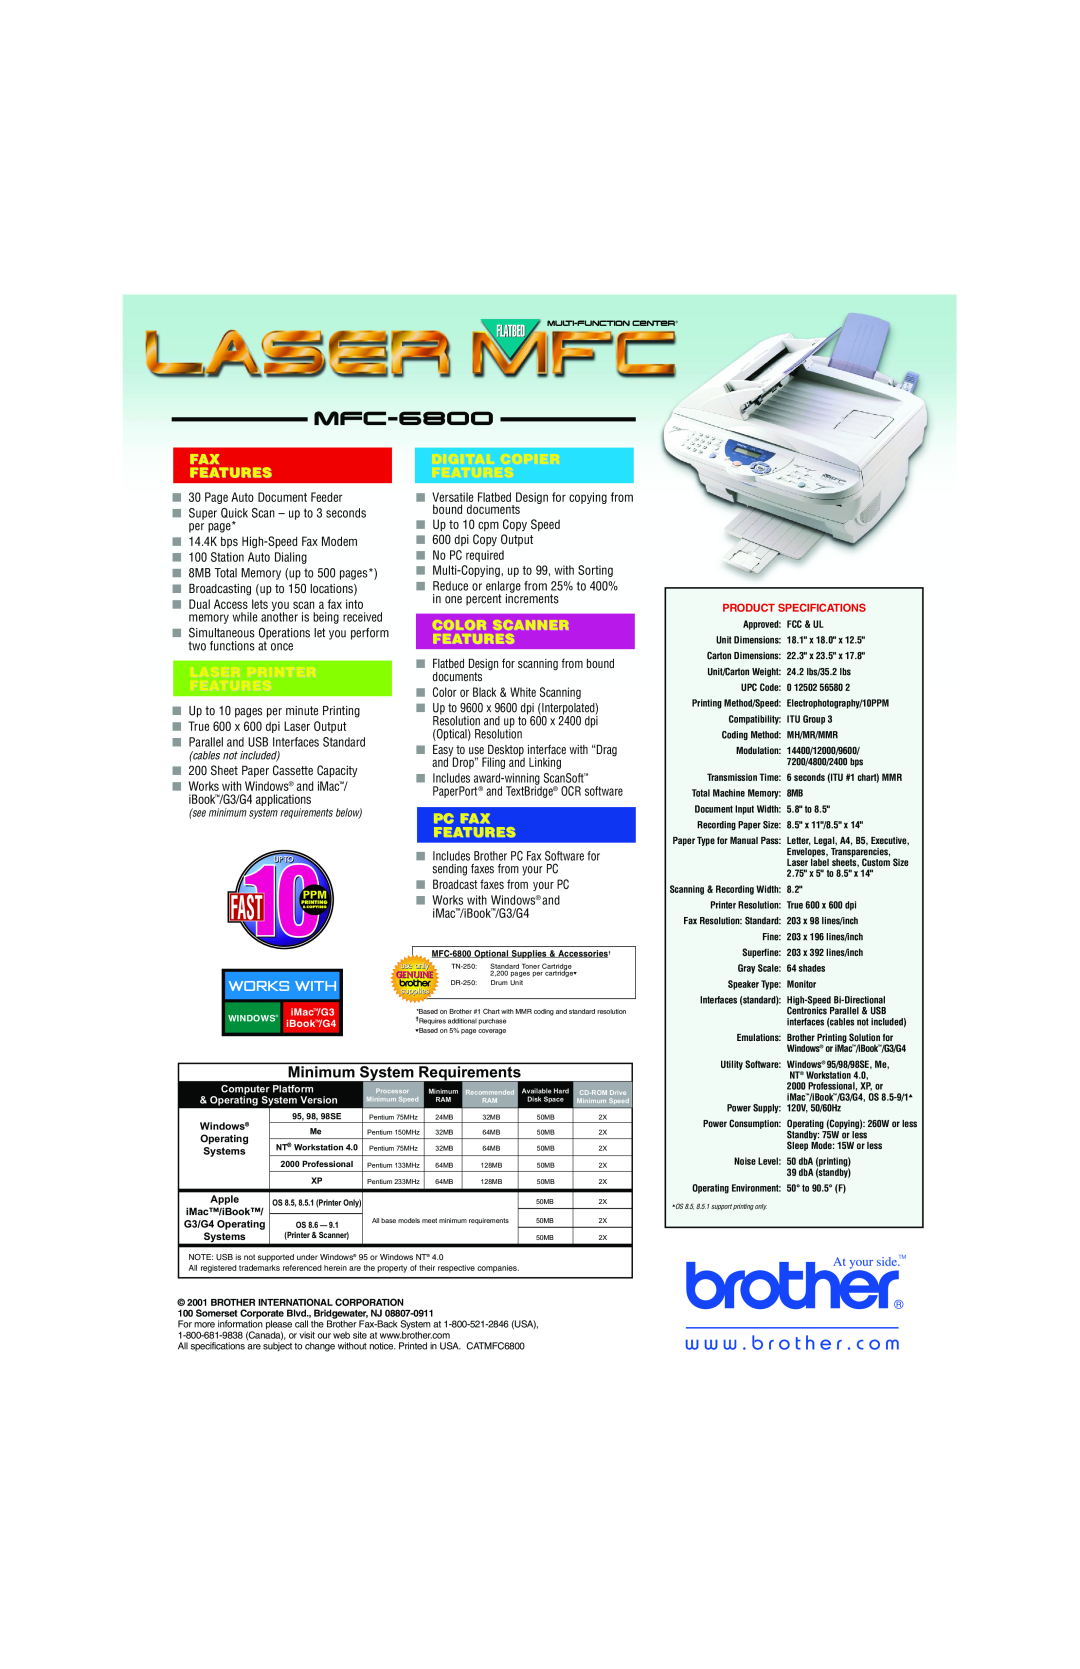 Brother MFC-6800 Minimum System Requirements, Fax Features, Laser Printer Features, Digital Copier Features, Works With 